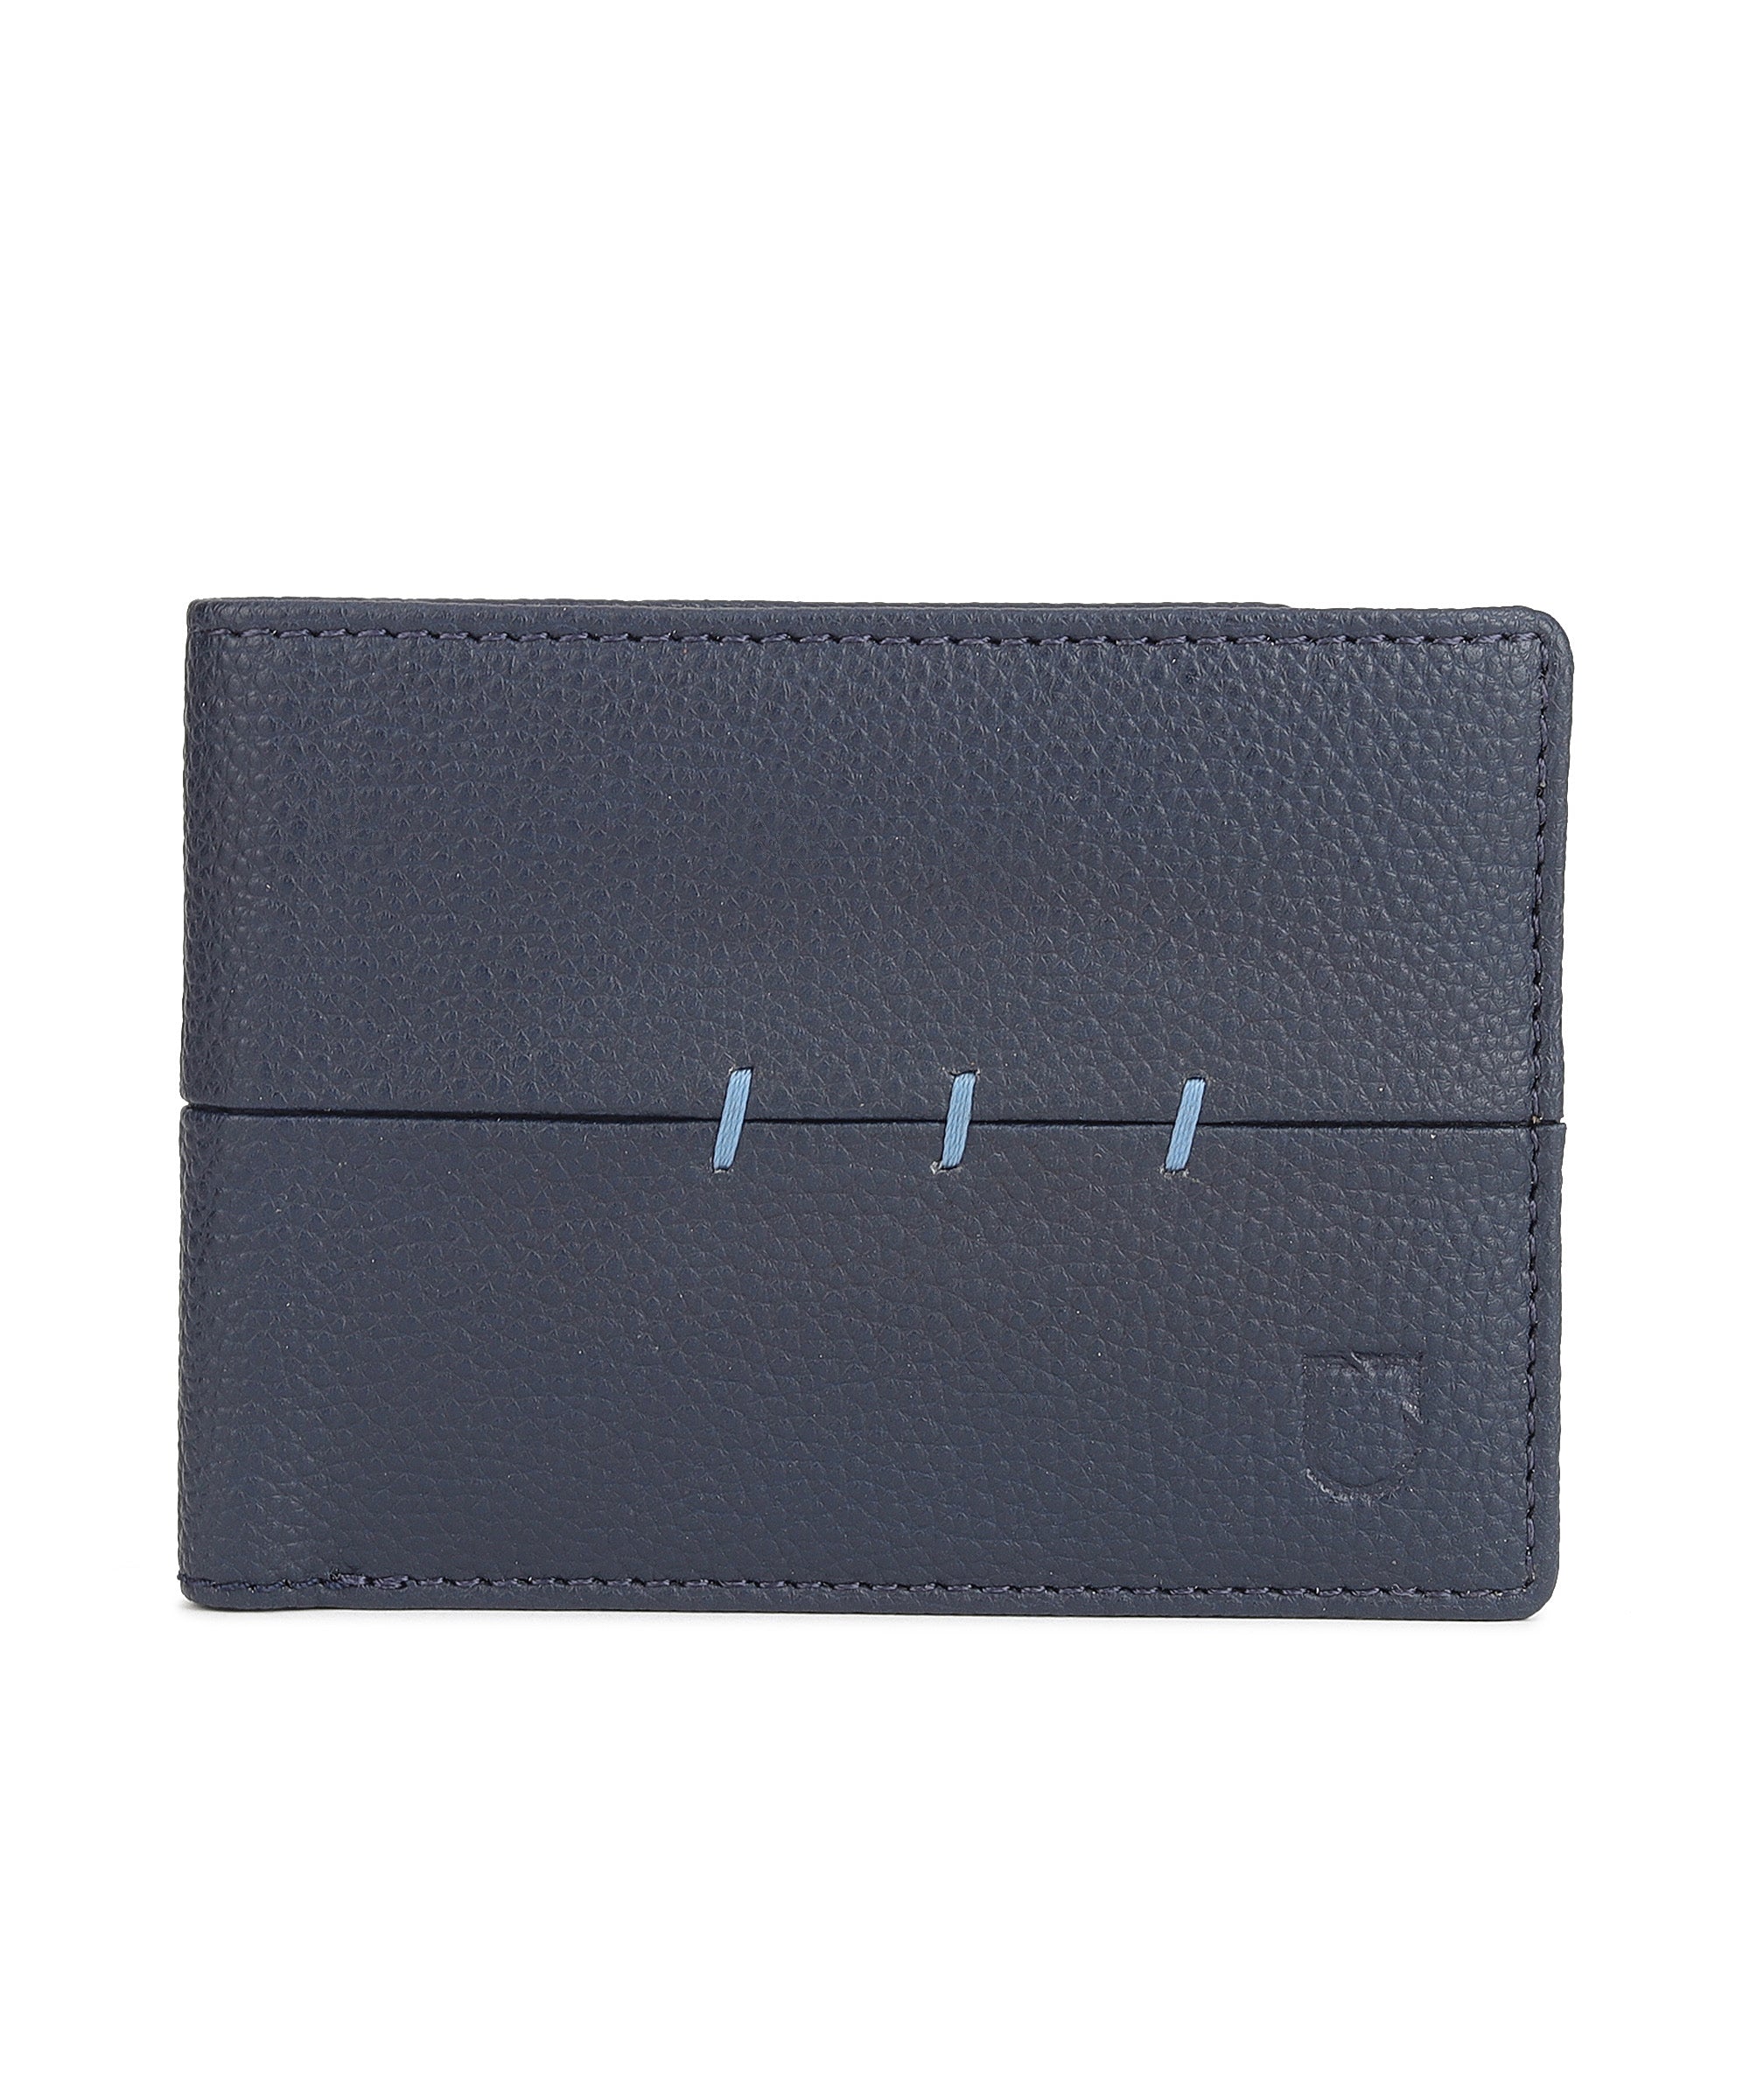 Urbano Fashion Men's Blue Casual, Formal Leather Wallet-6 Card Slots